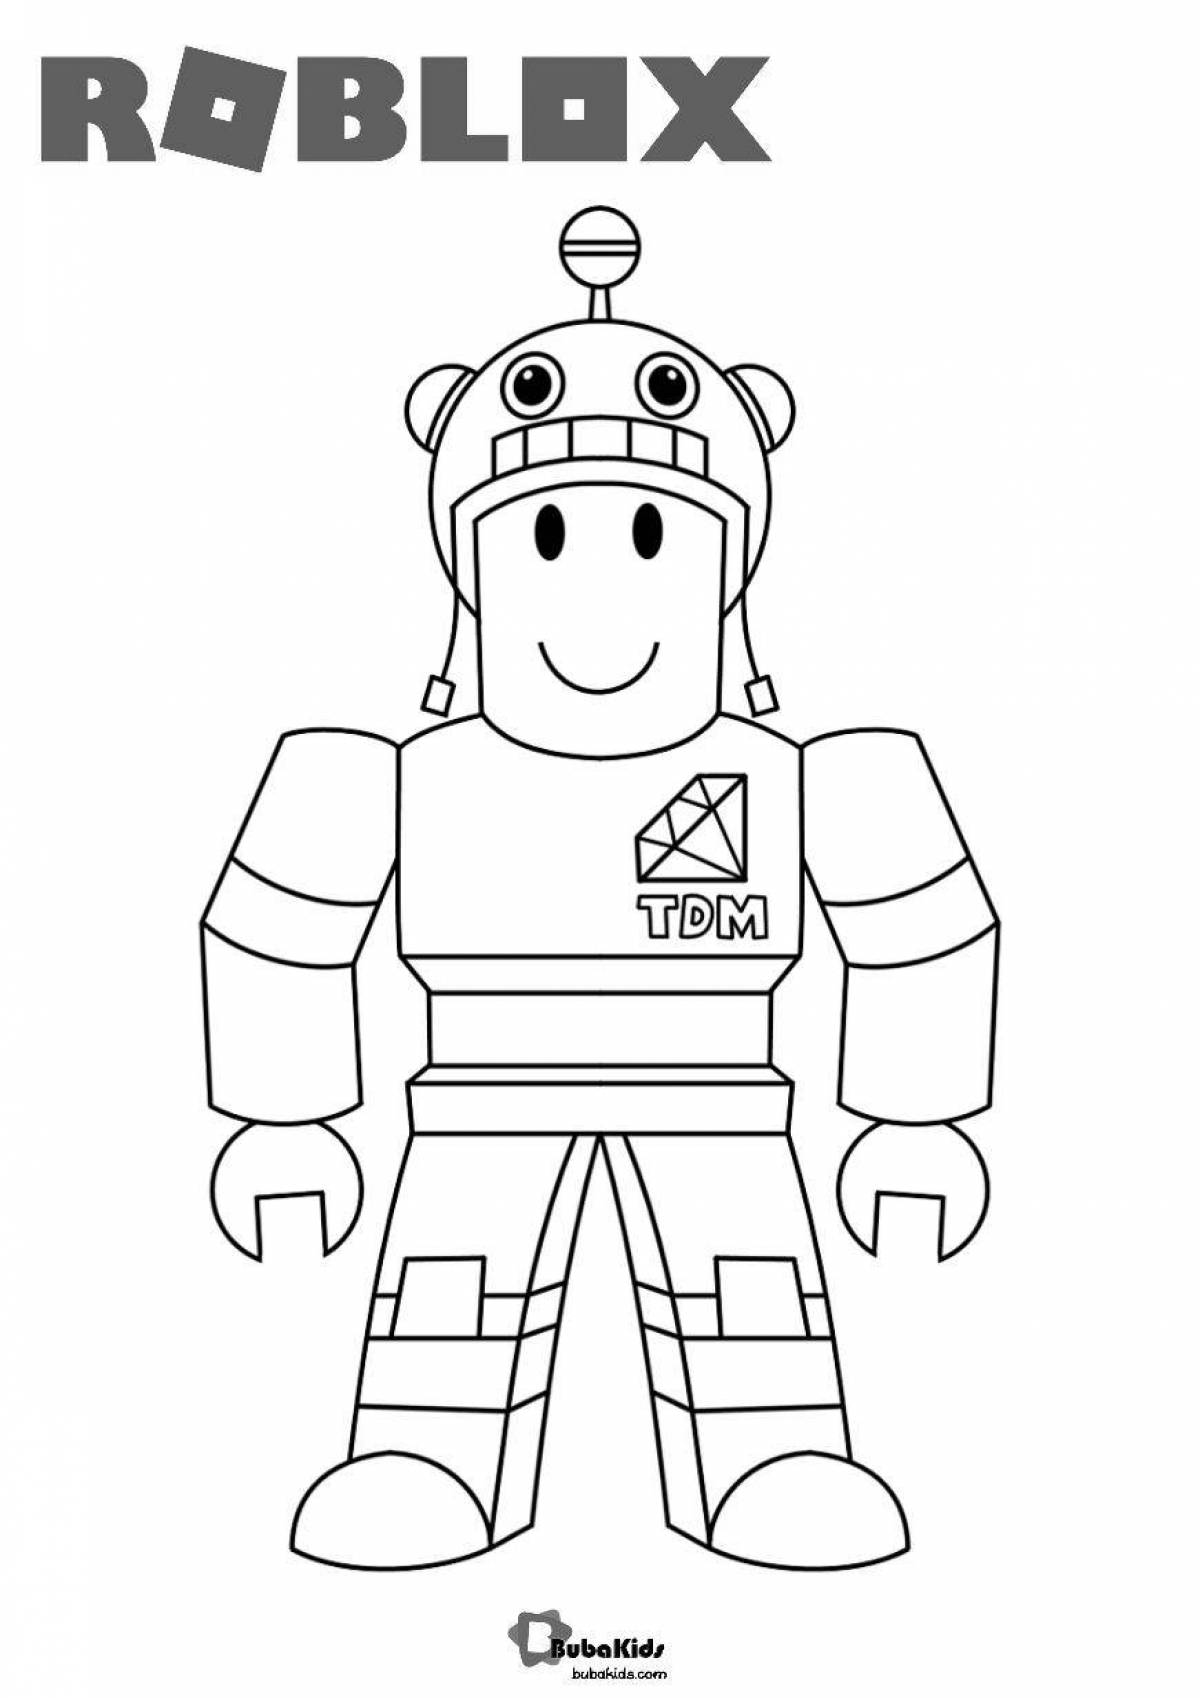 Colorful roblox people girls coloring page